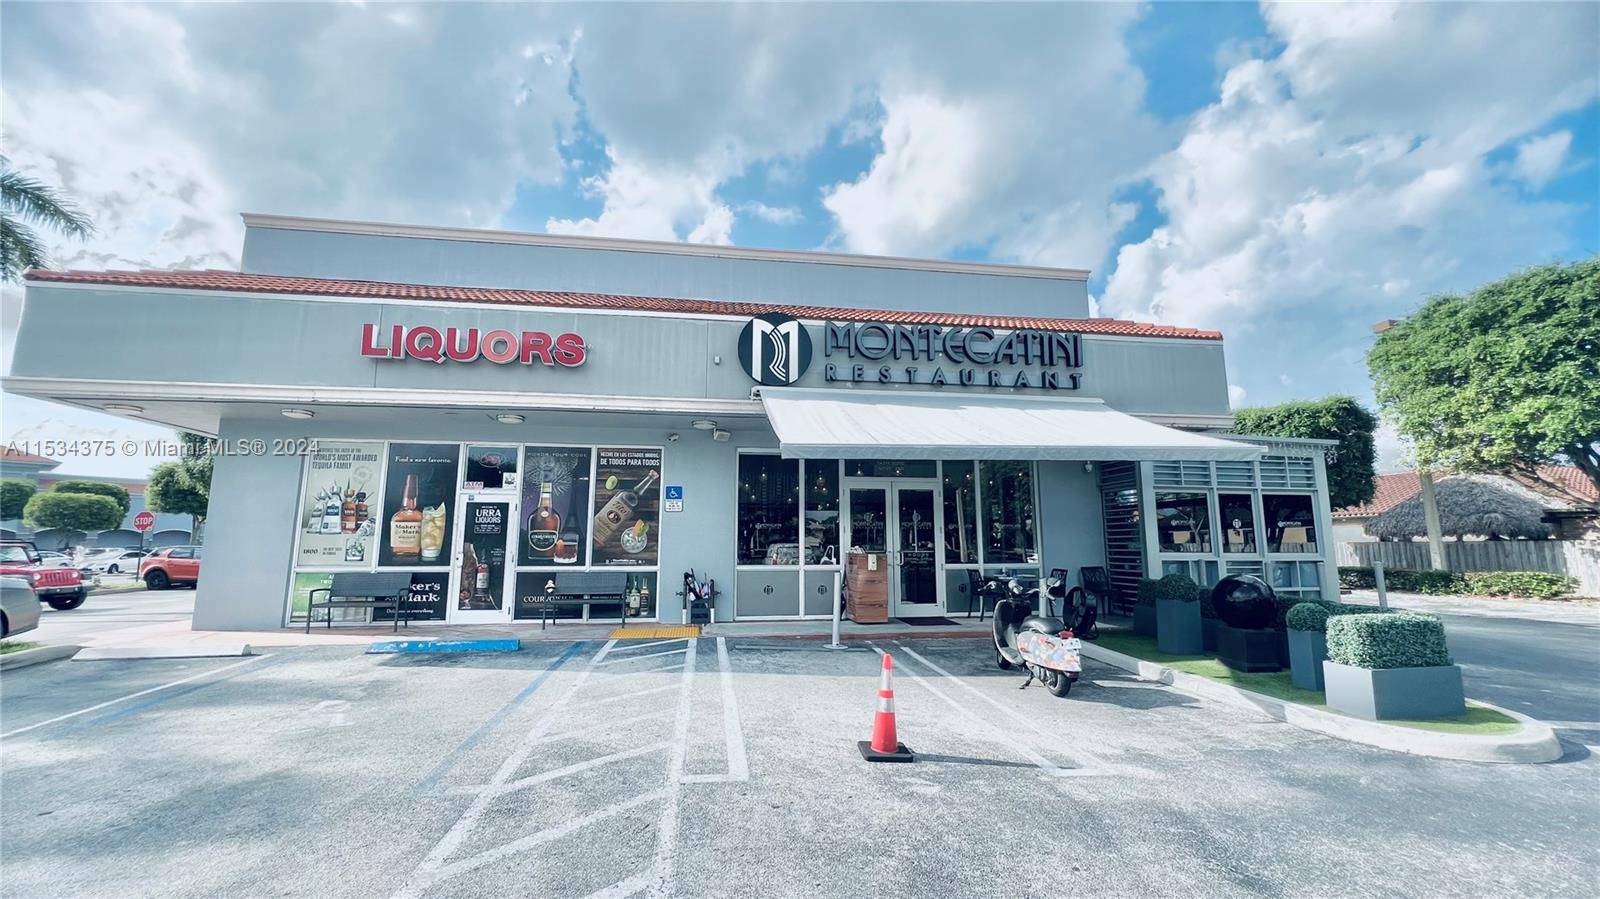 Excellent location ! ! Building for sale in the famous shopping plaza Bird Road Plaza has two units, a liquor store and an amazing completely remodeled restaurant, conveniently located right ...